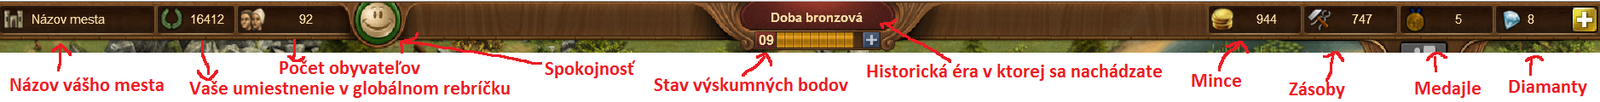 vrchny-panel.png